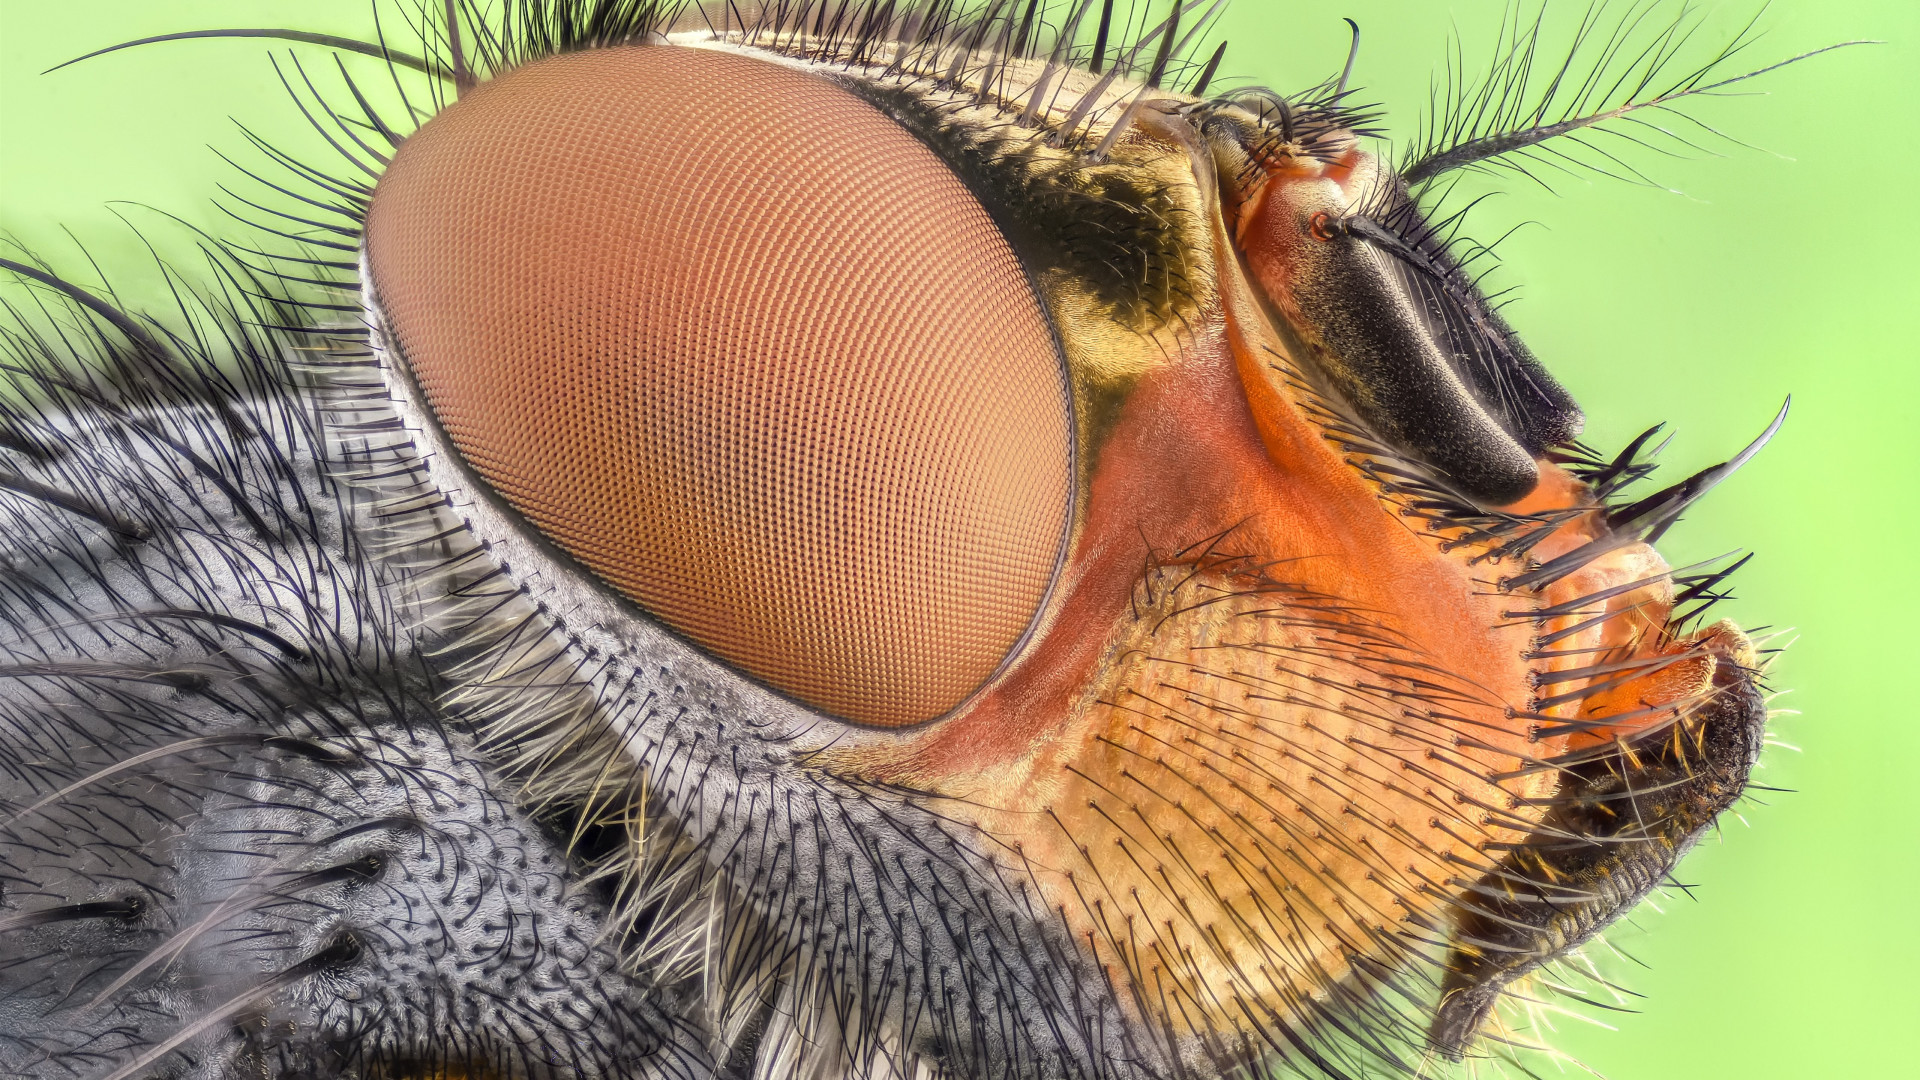 Close up insect portrait wallpaper 1920x1080